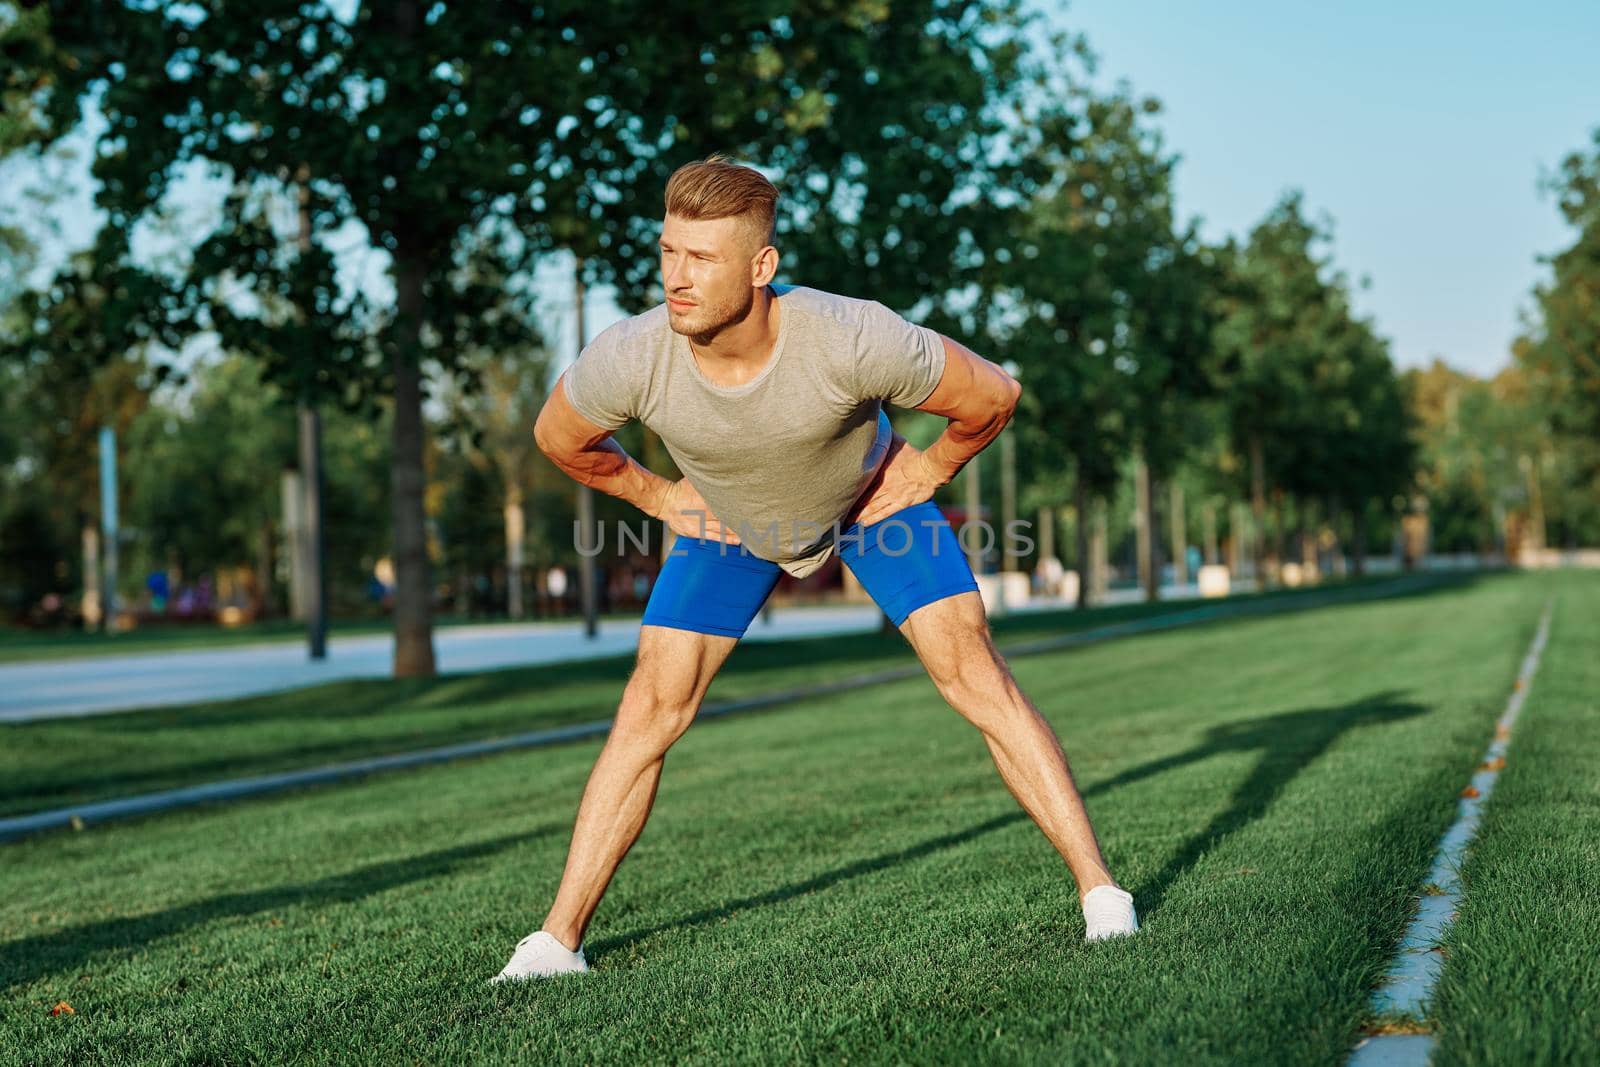 sporty man in the park on the lawn exercise lifestyle. High quality photo